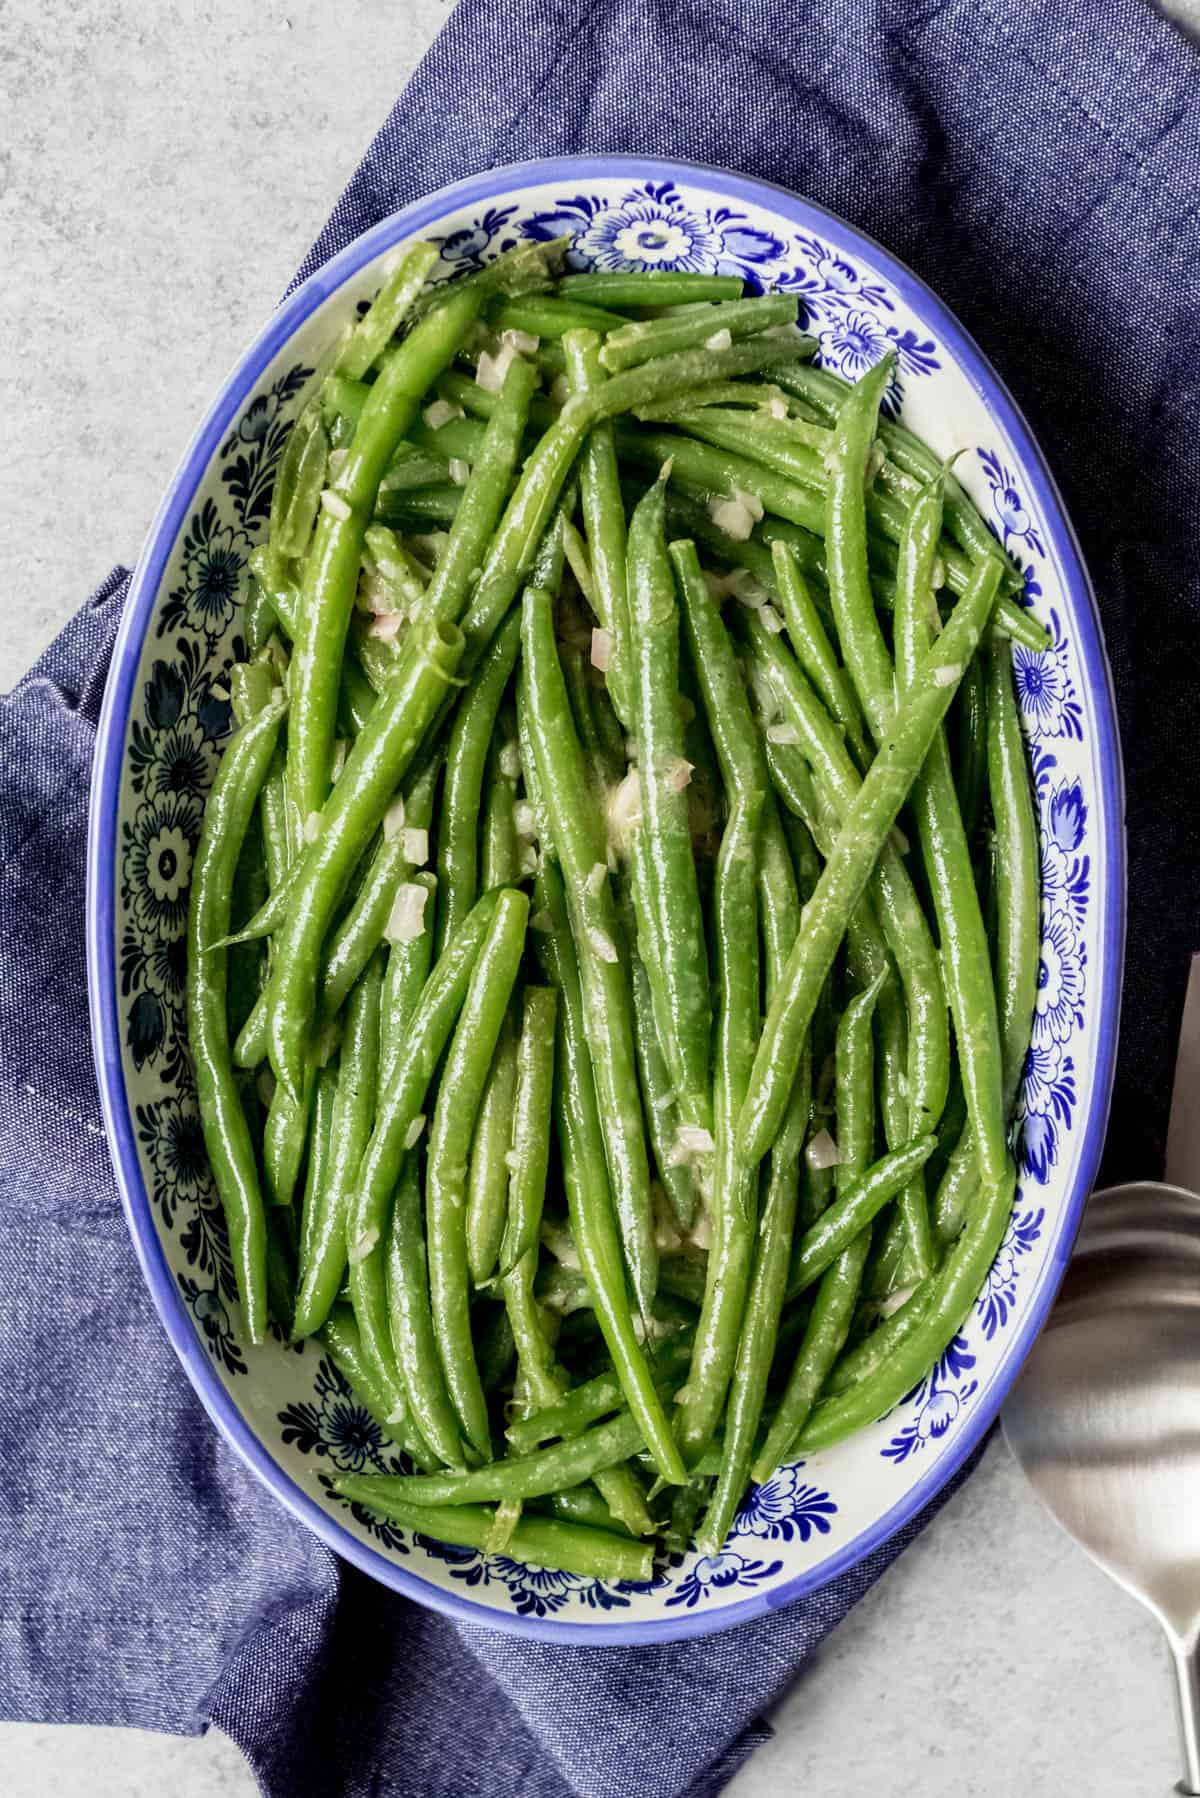 An image of haricot verts in a blue and white serve bowl.